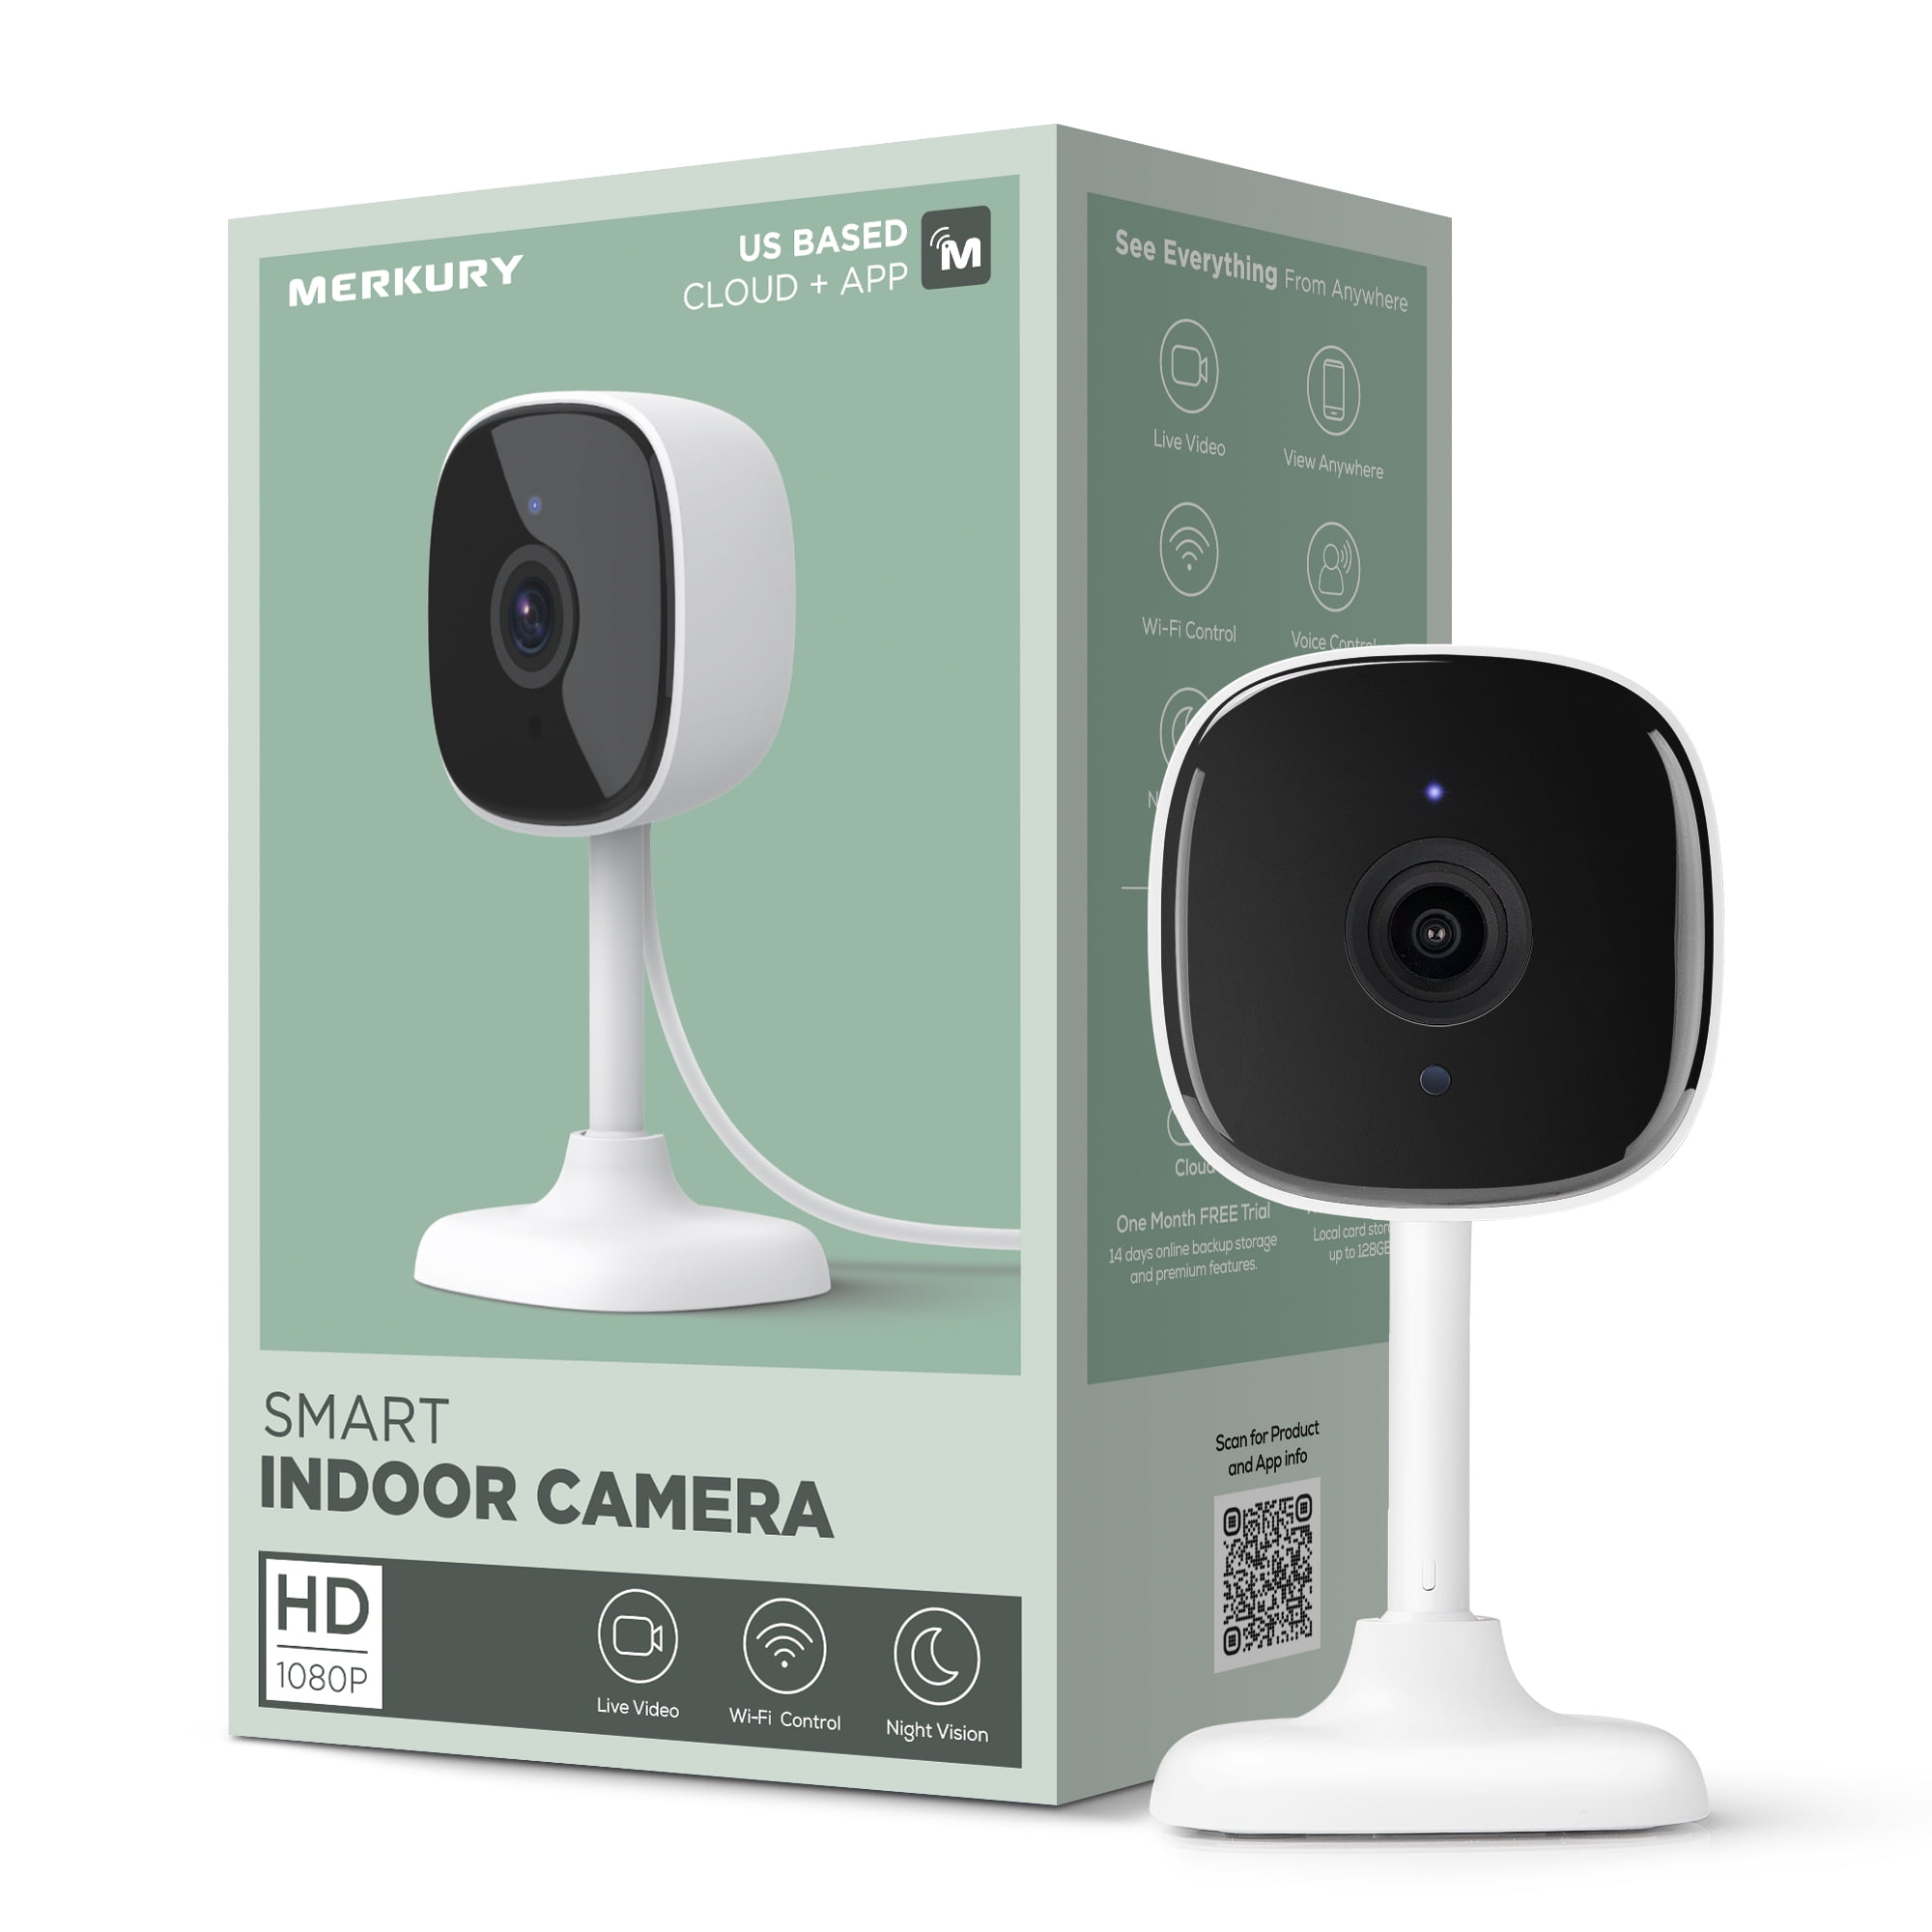 2 pack) Merkury Smart 1080P Smart Indoor Camera with Voice Control - Requires 2.4 GHz Wi-Fi